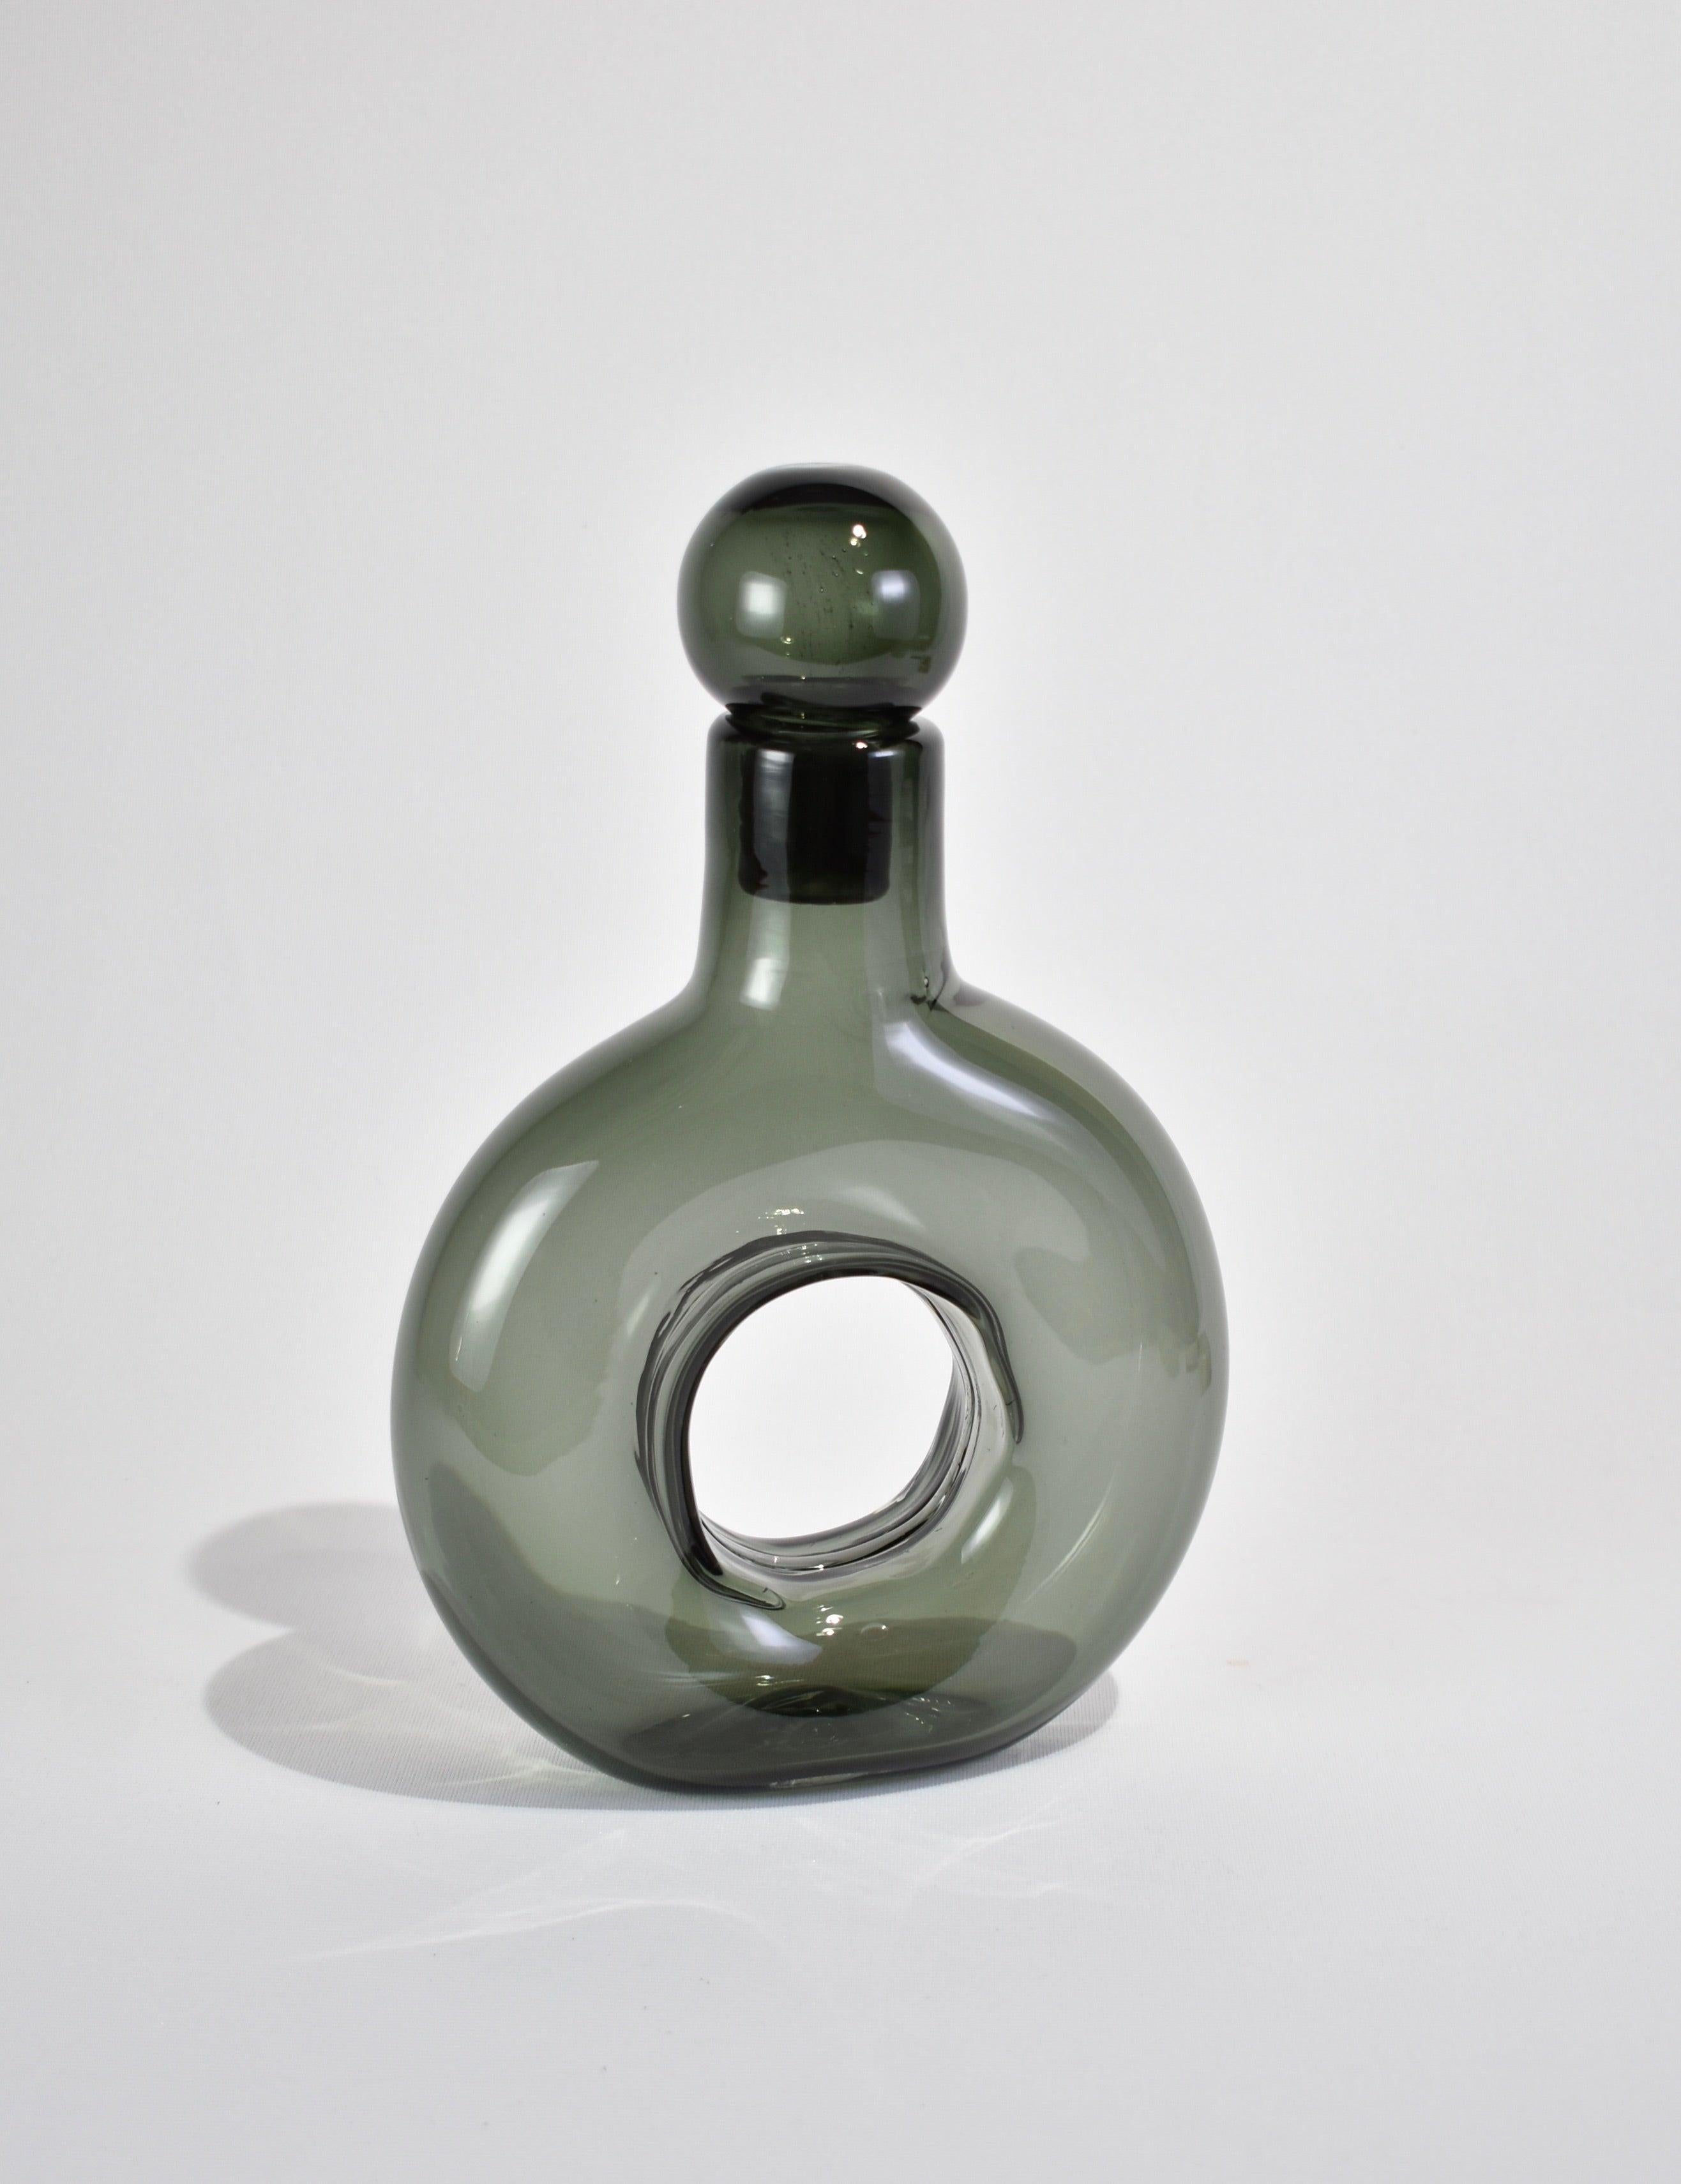 Our first in-house collection pairs modern rounded shapes with colors inspired by ancient Venetian glassware resulting in a functional, beautiful piece to be admired and used often. Each vessel is hand blown in Richmond, Virginia and